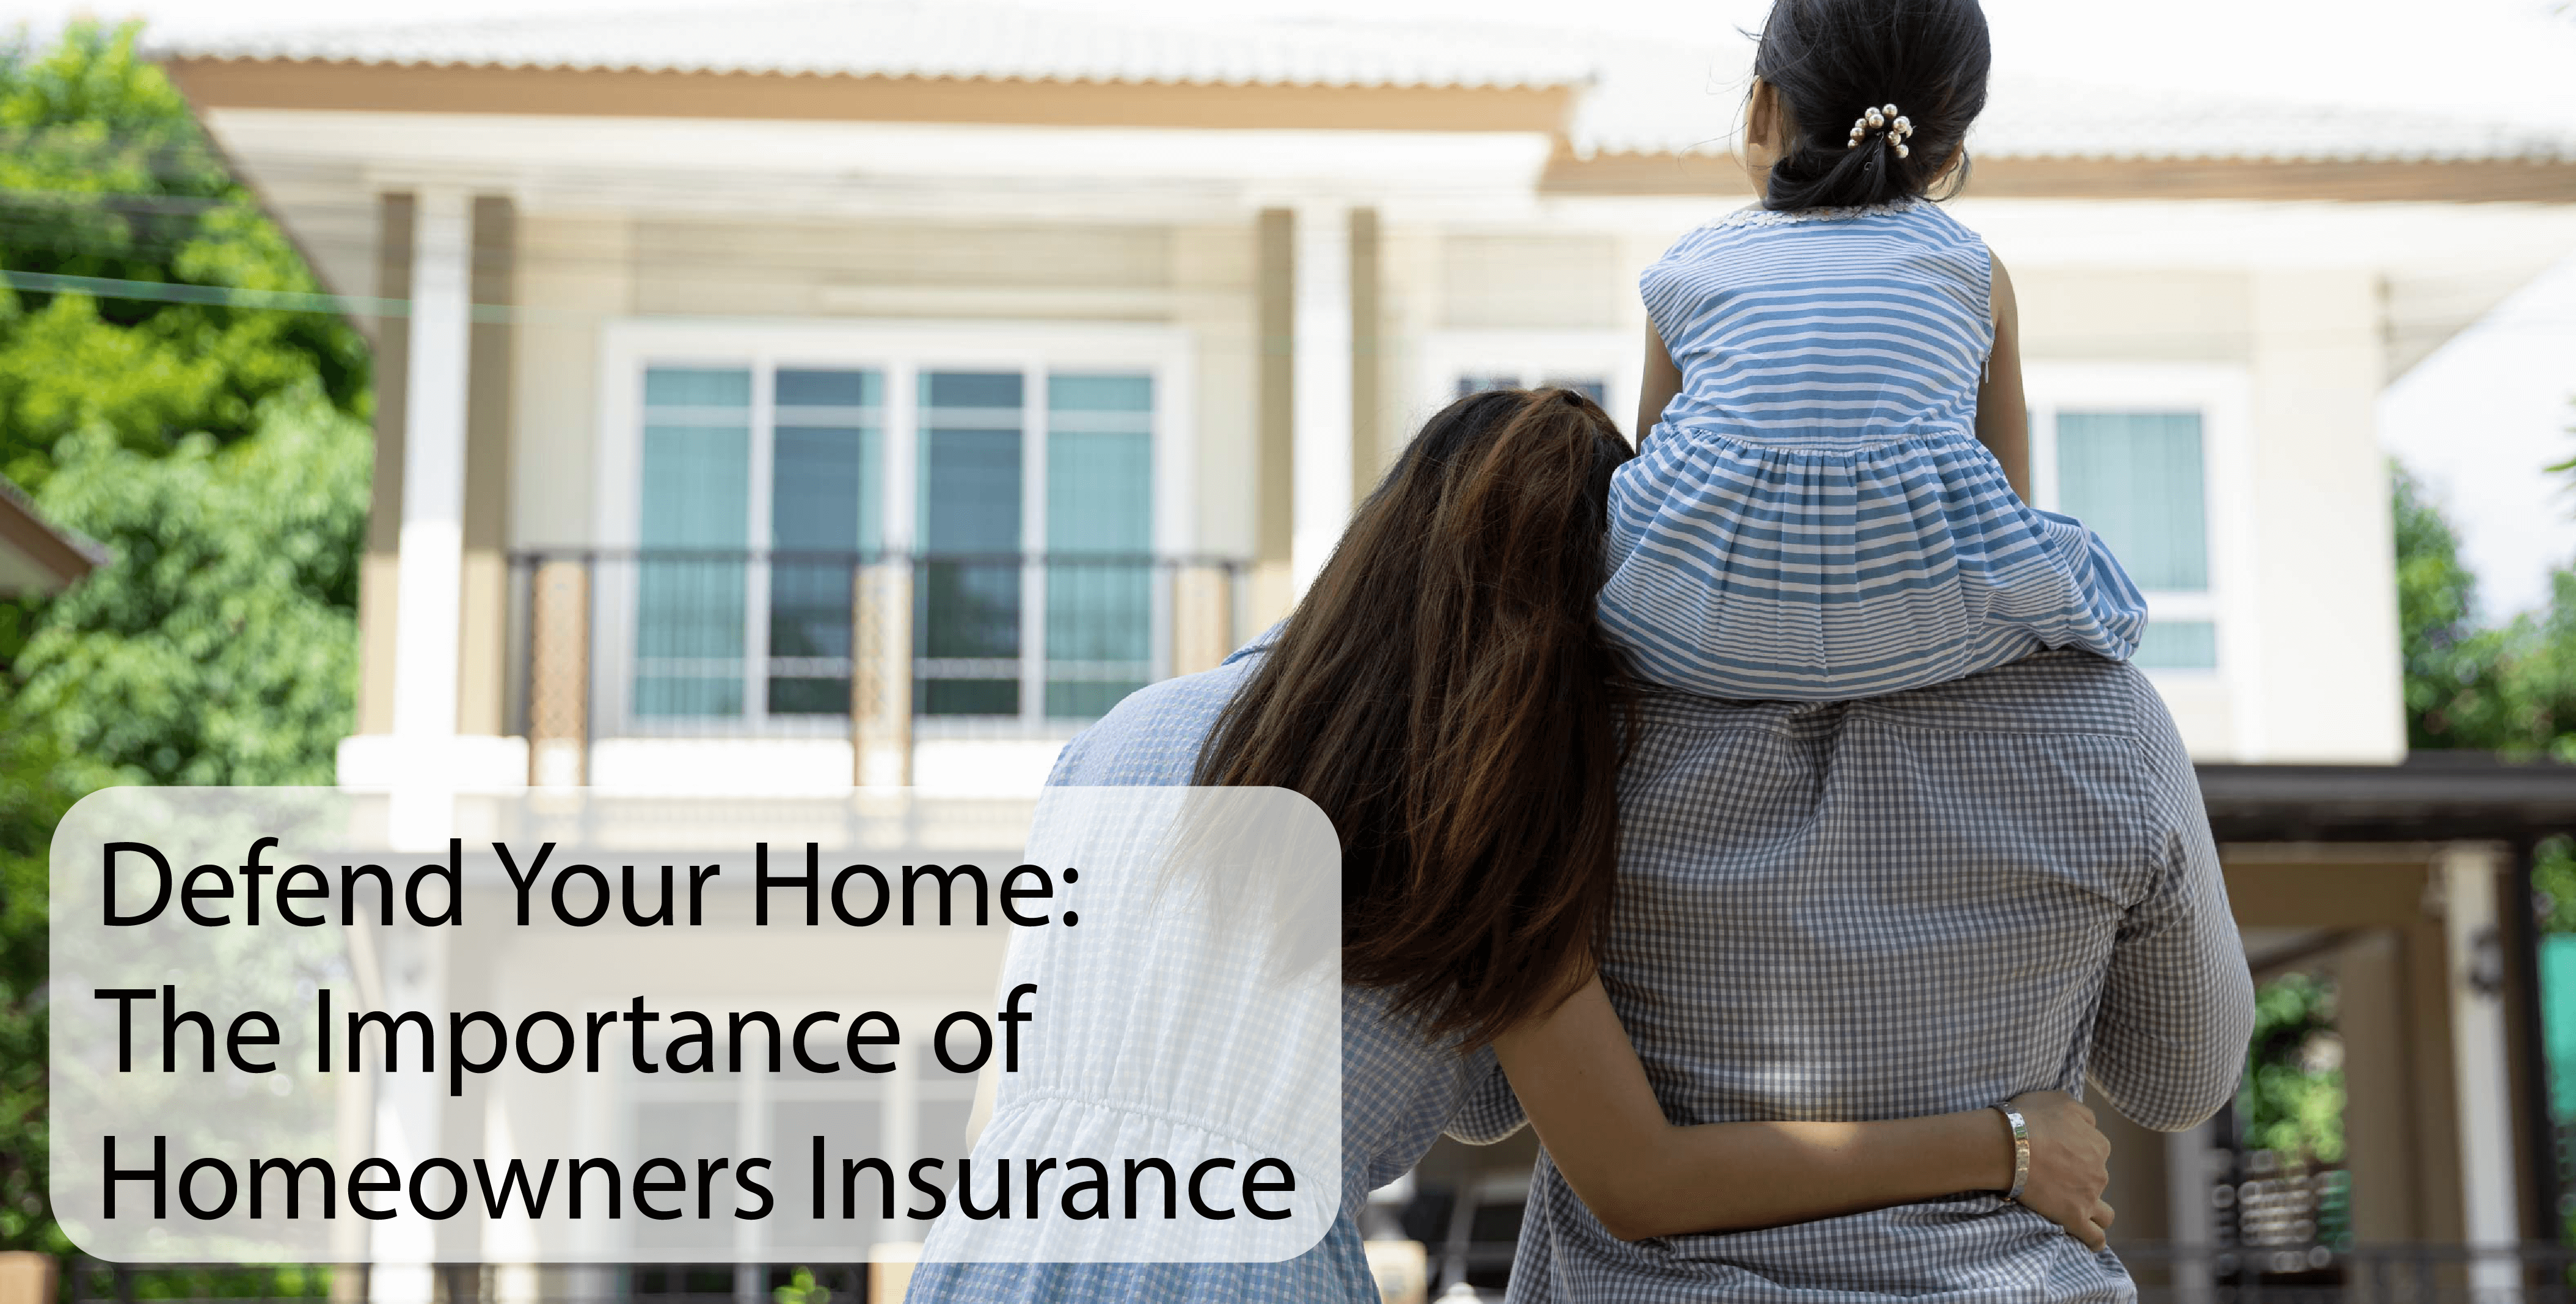 Defend Your Home: The Importance of Homeowners Insurance